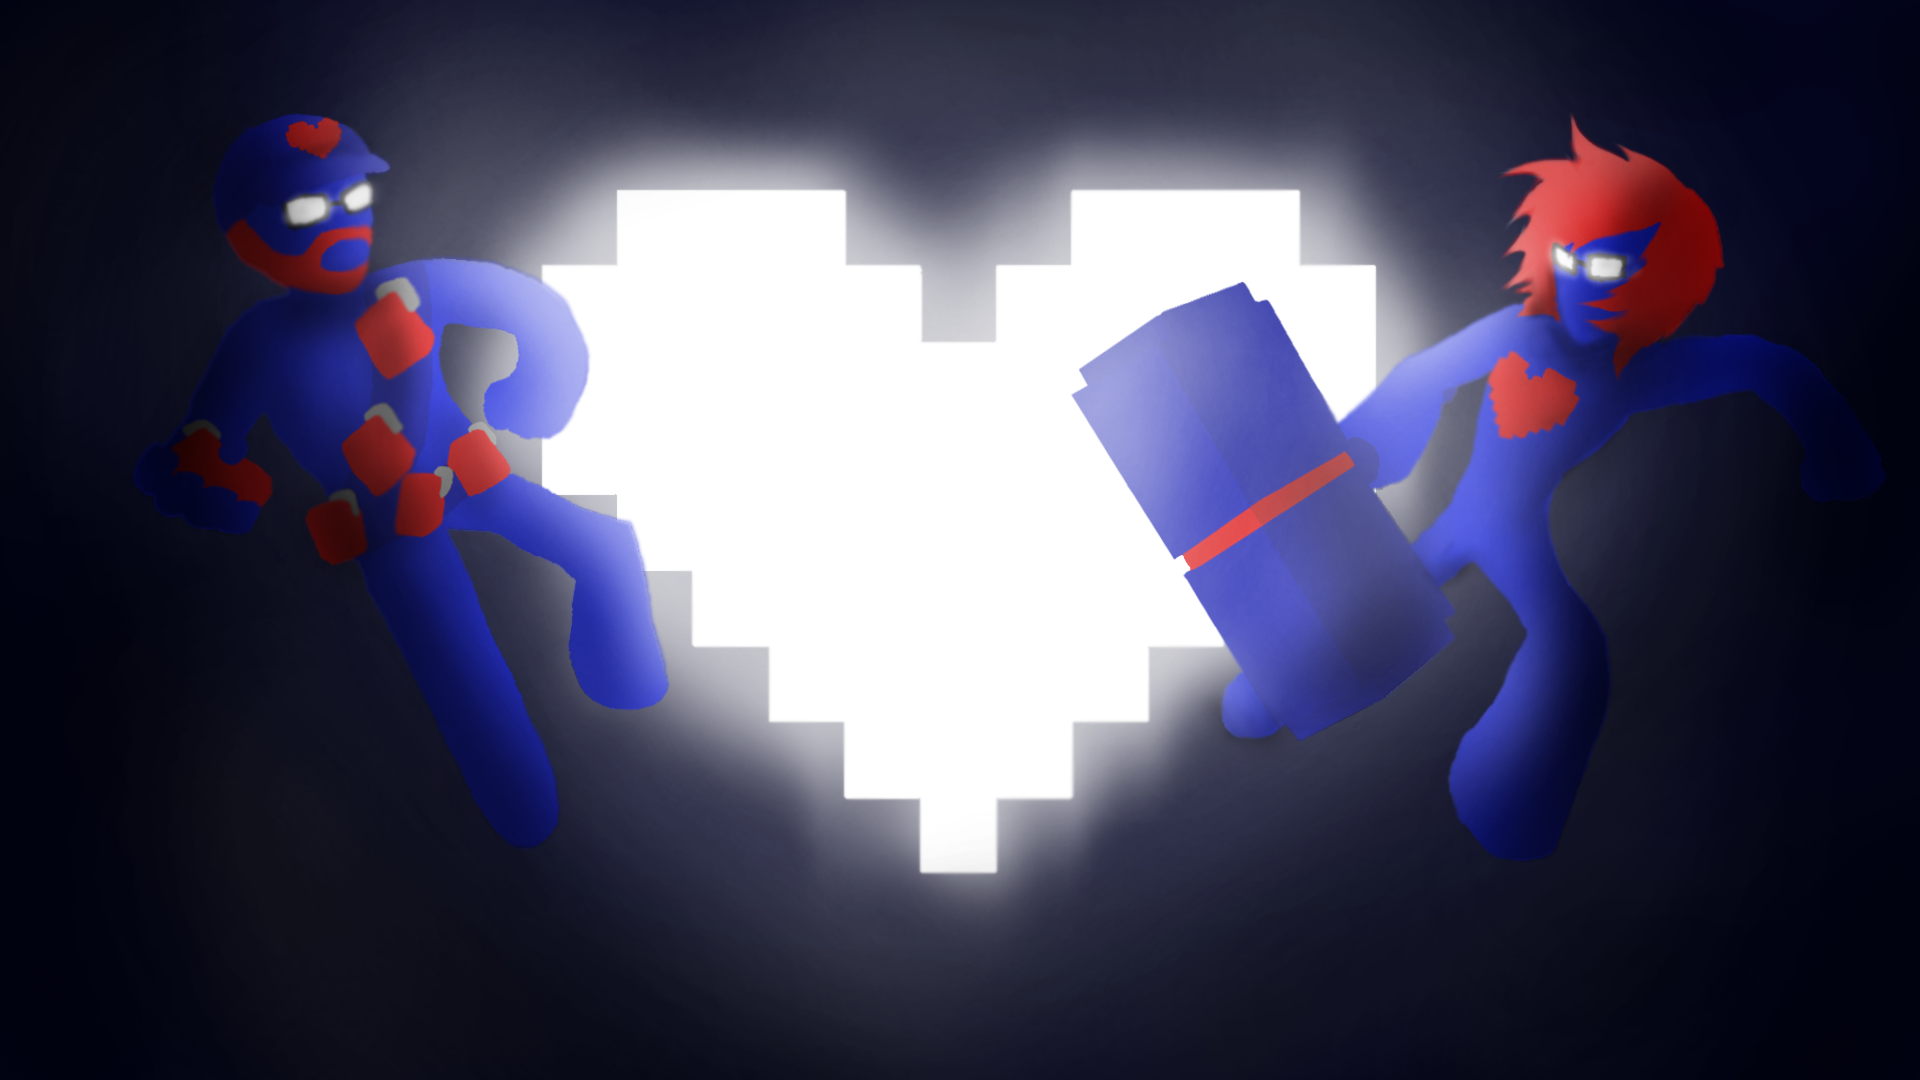 Free download Pegboard Nerds Wallpaper Requests to